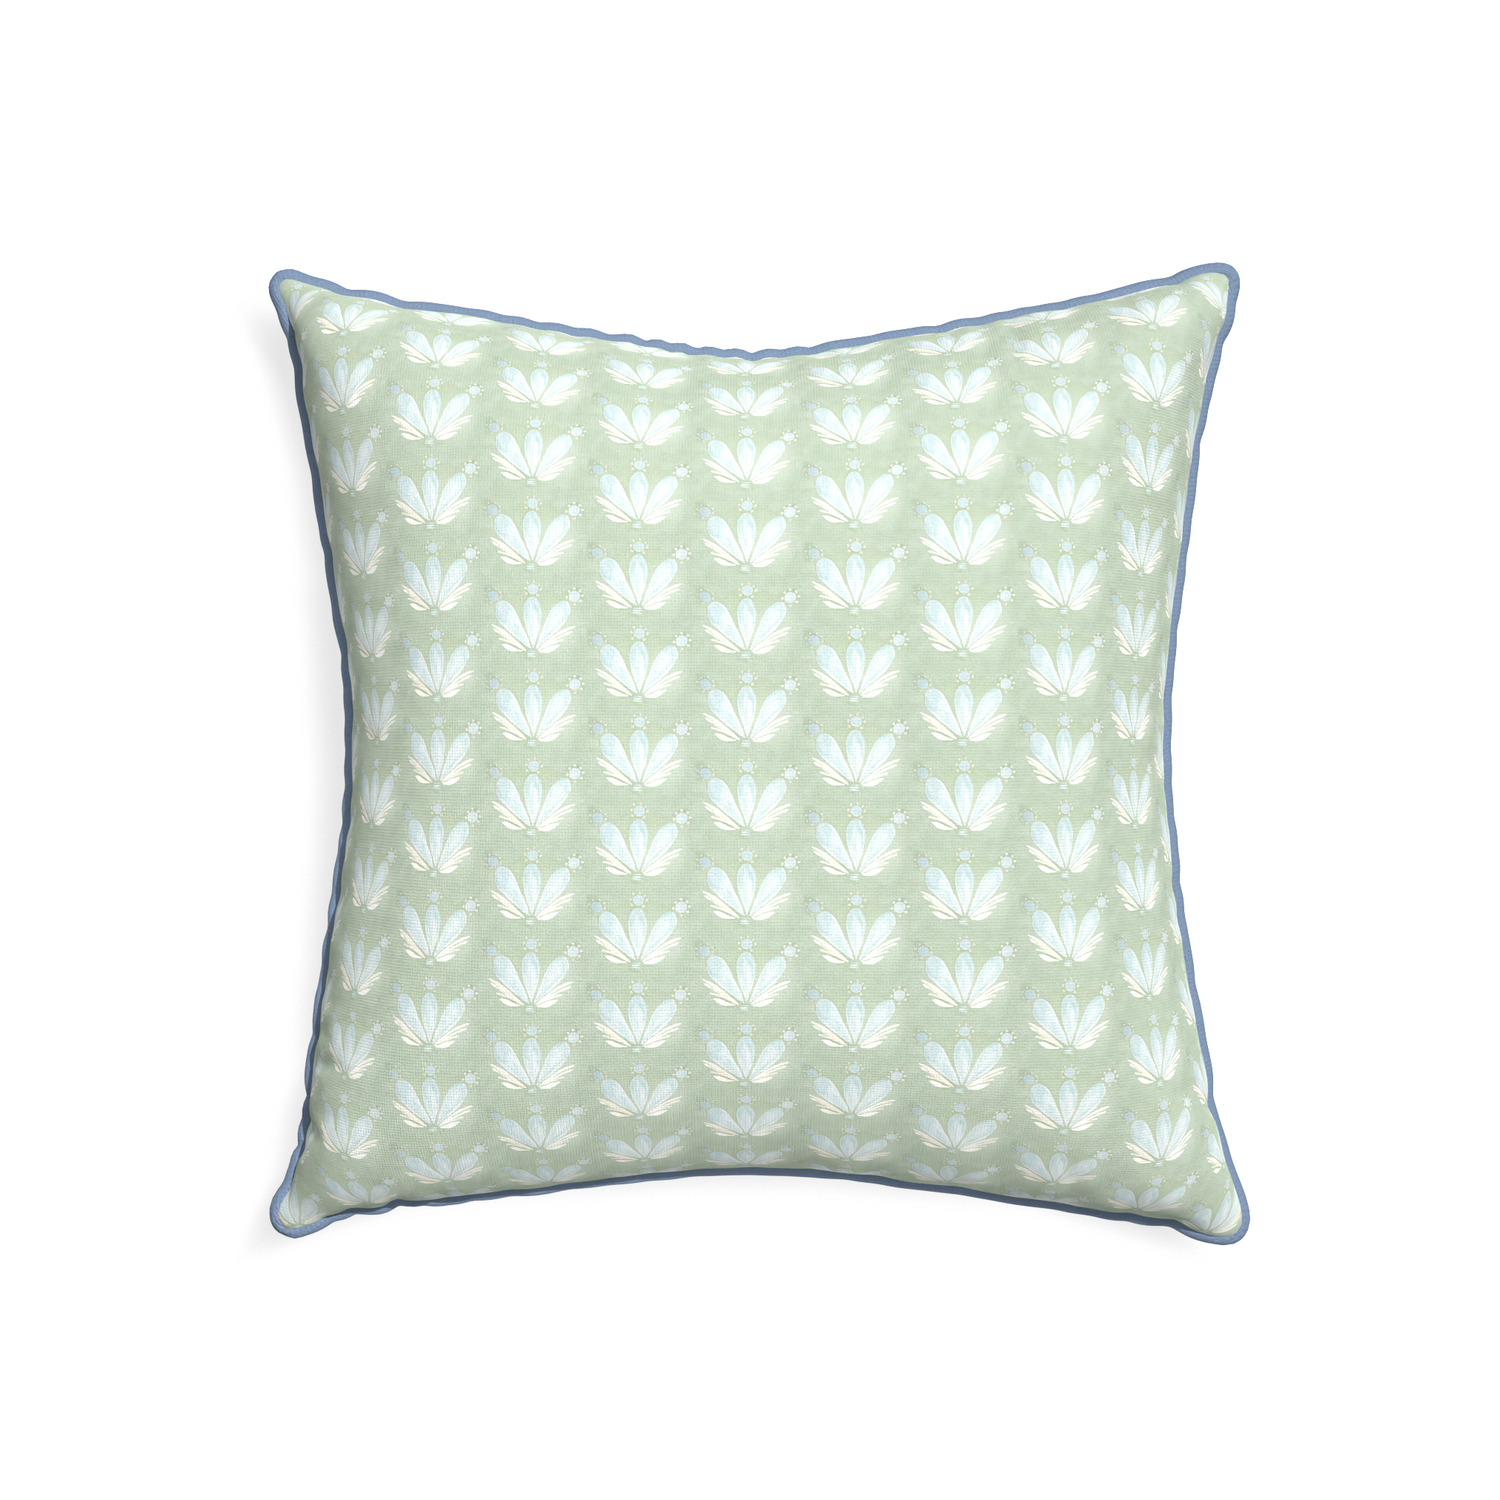 22-square serena sea salt custom blue & green floral drop repeatpillow with sky piping on white background